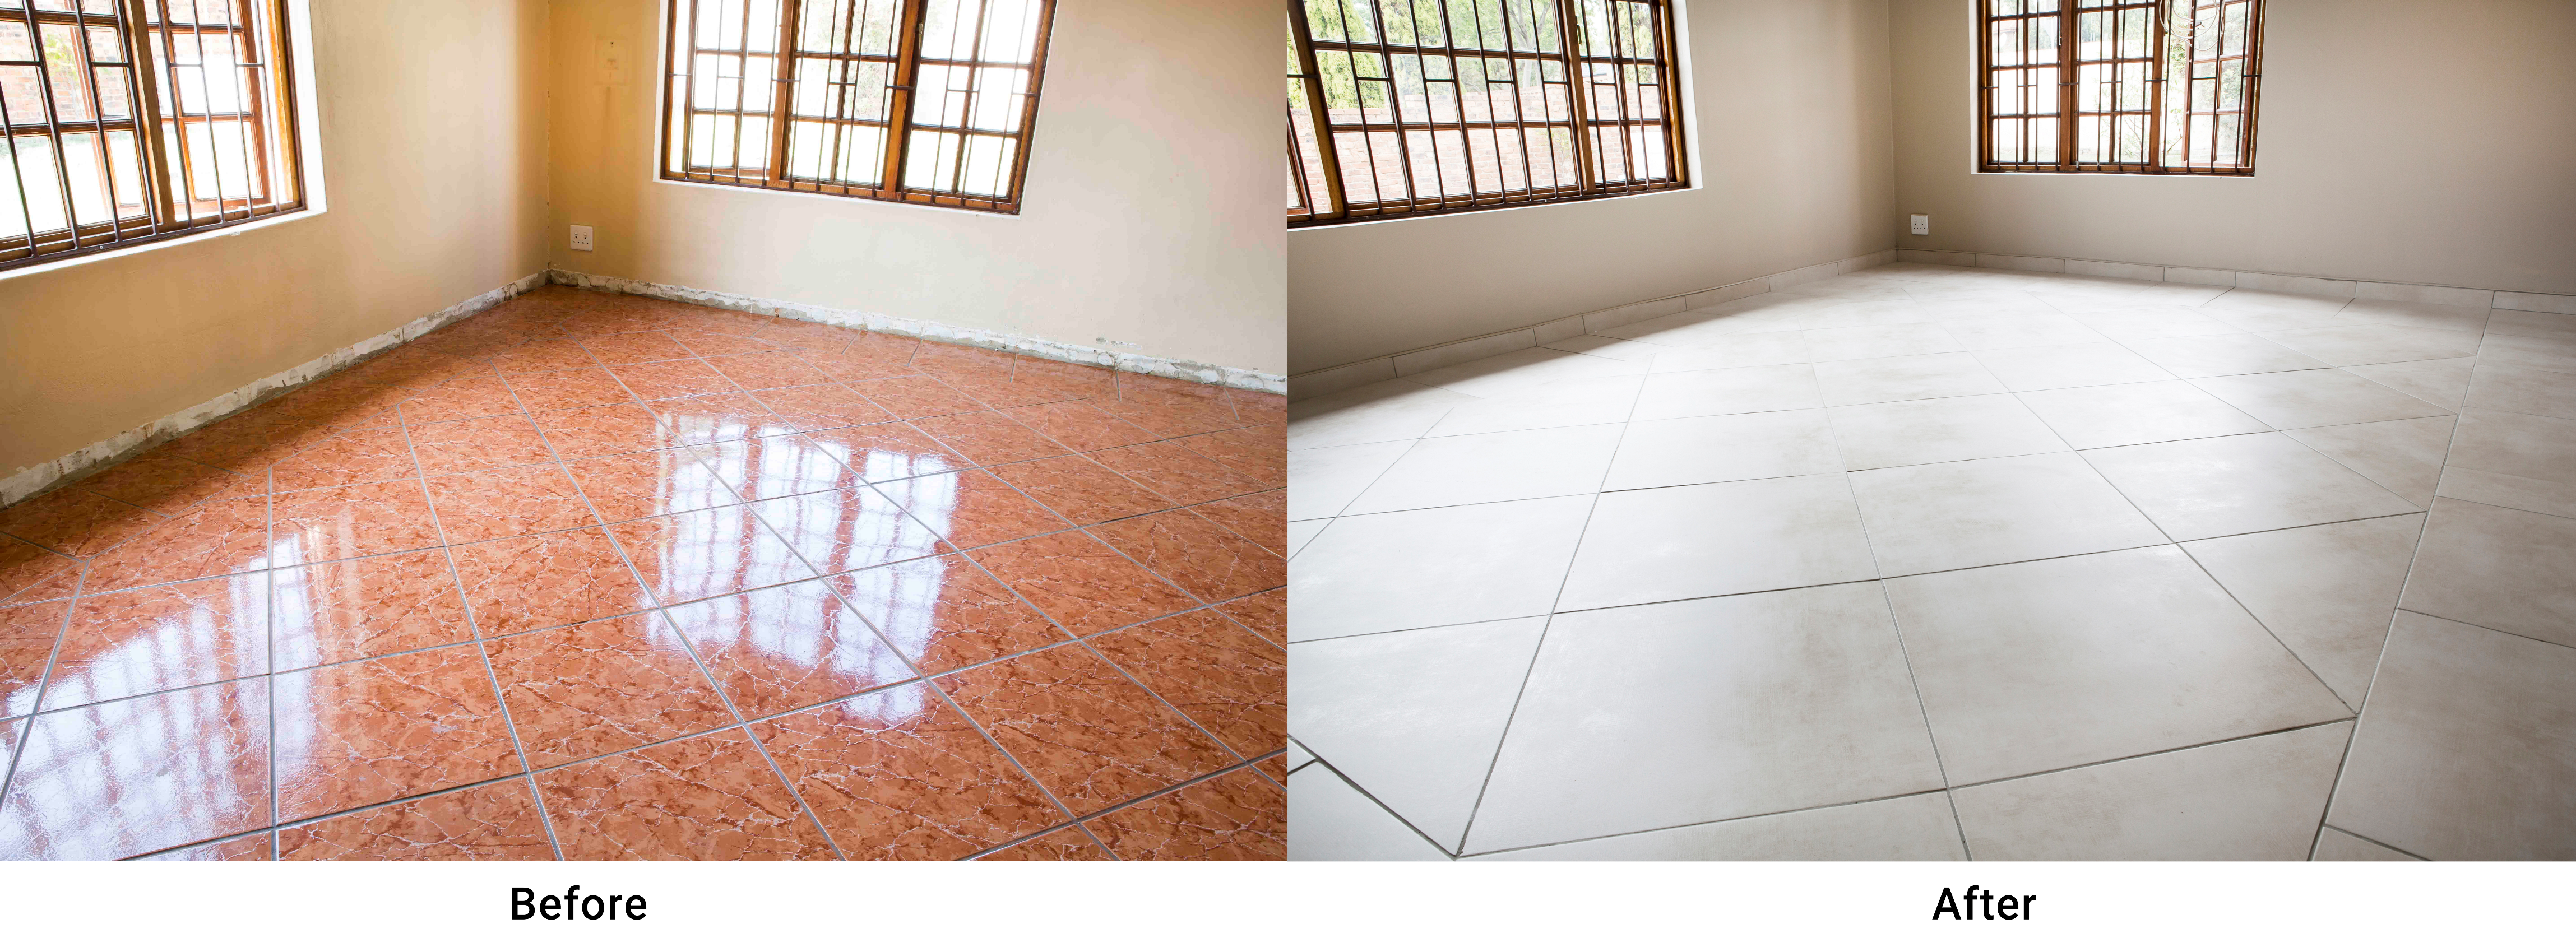 Tile Over Existing Tiles Successfully, Tile Over Floor Tiles